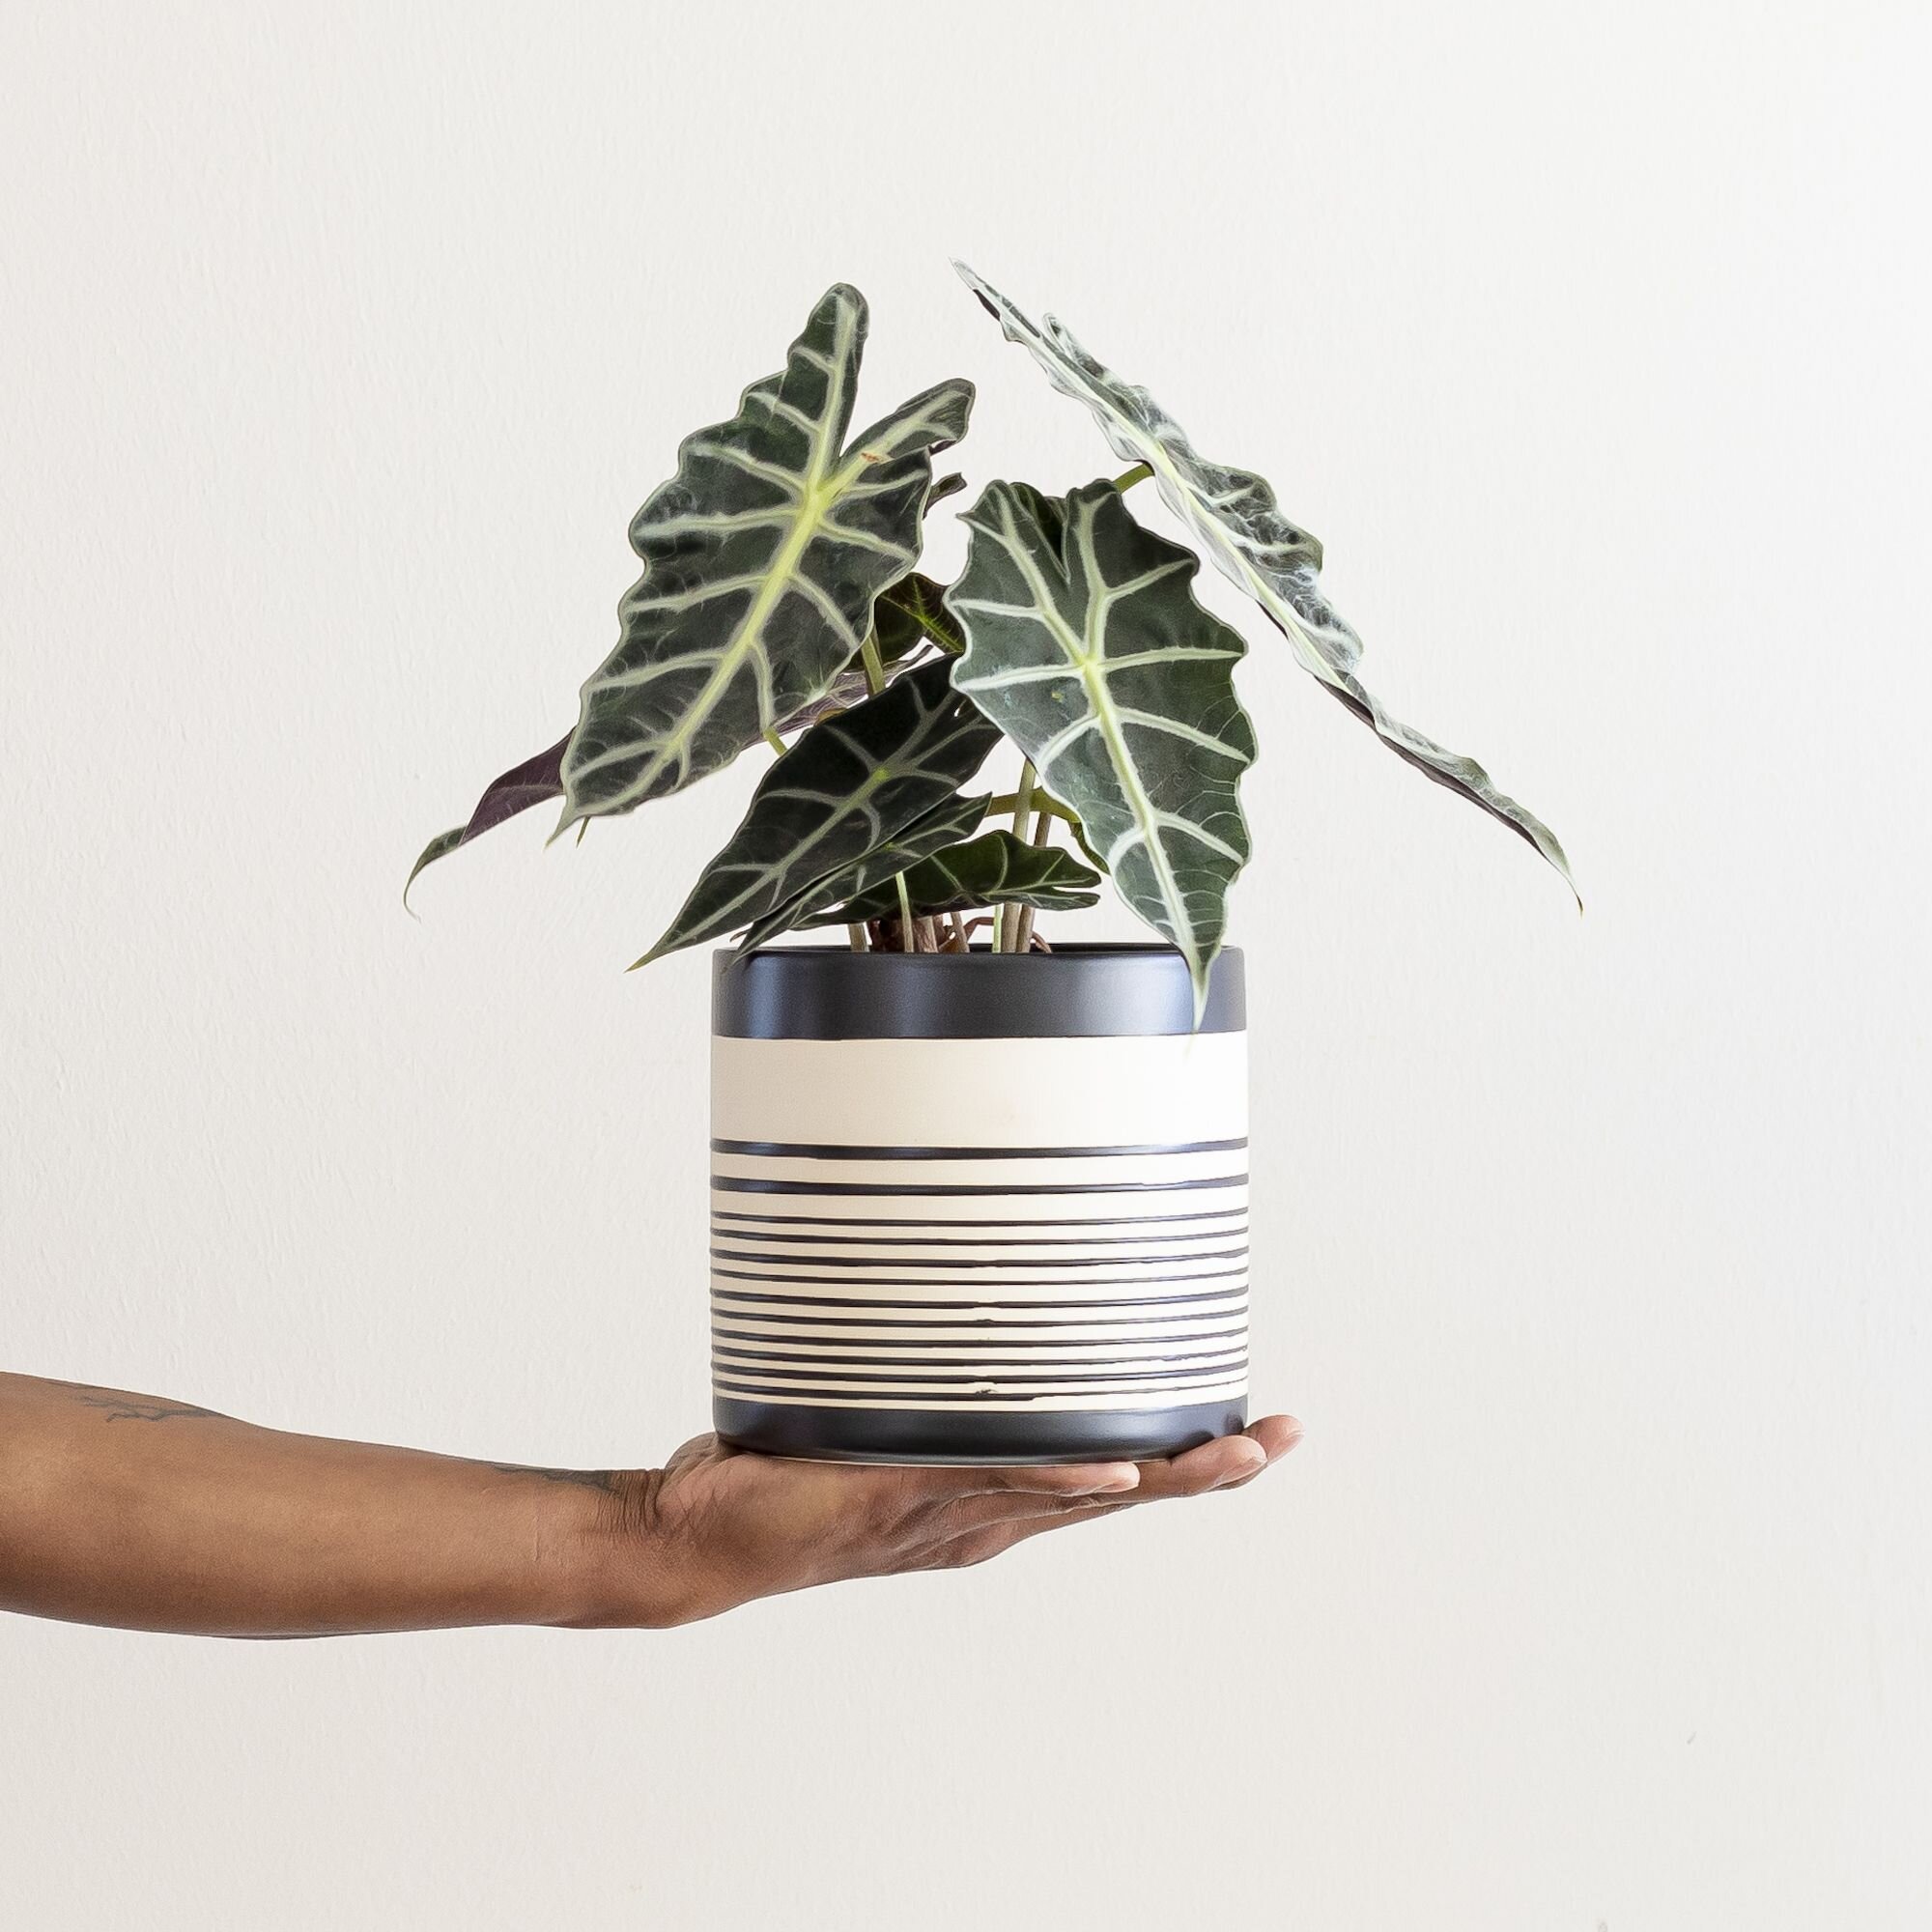 An Alocasia plant in a black and cream striped pot being held up by a hand in front of a neutral background